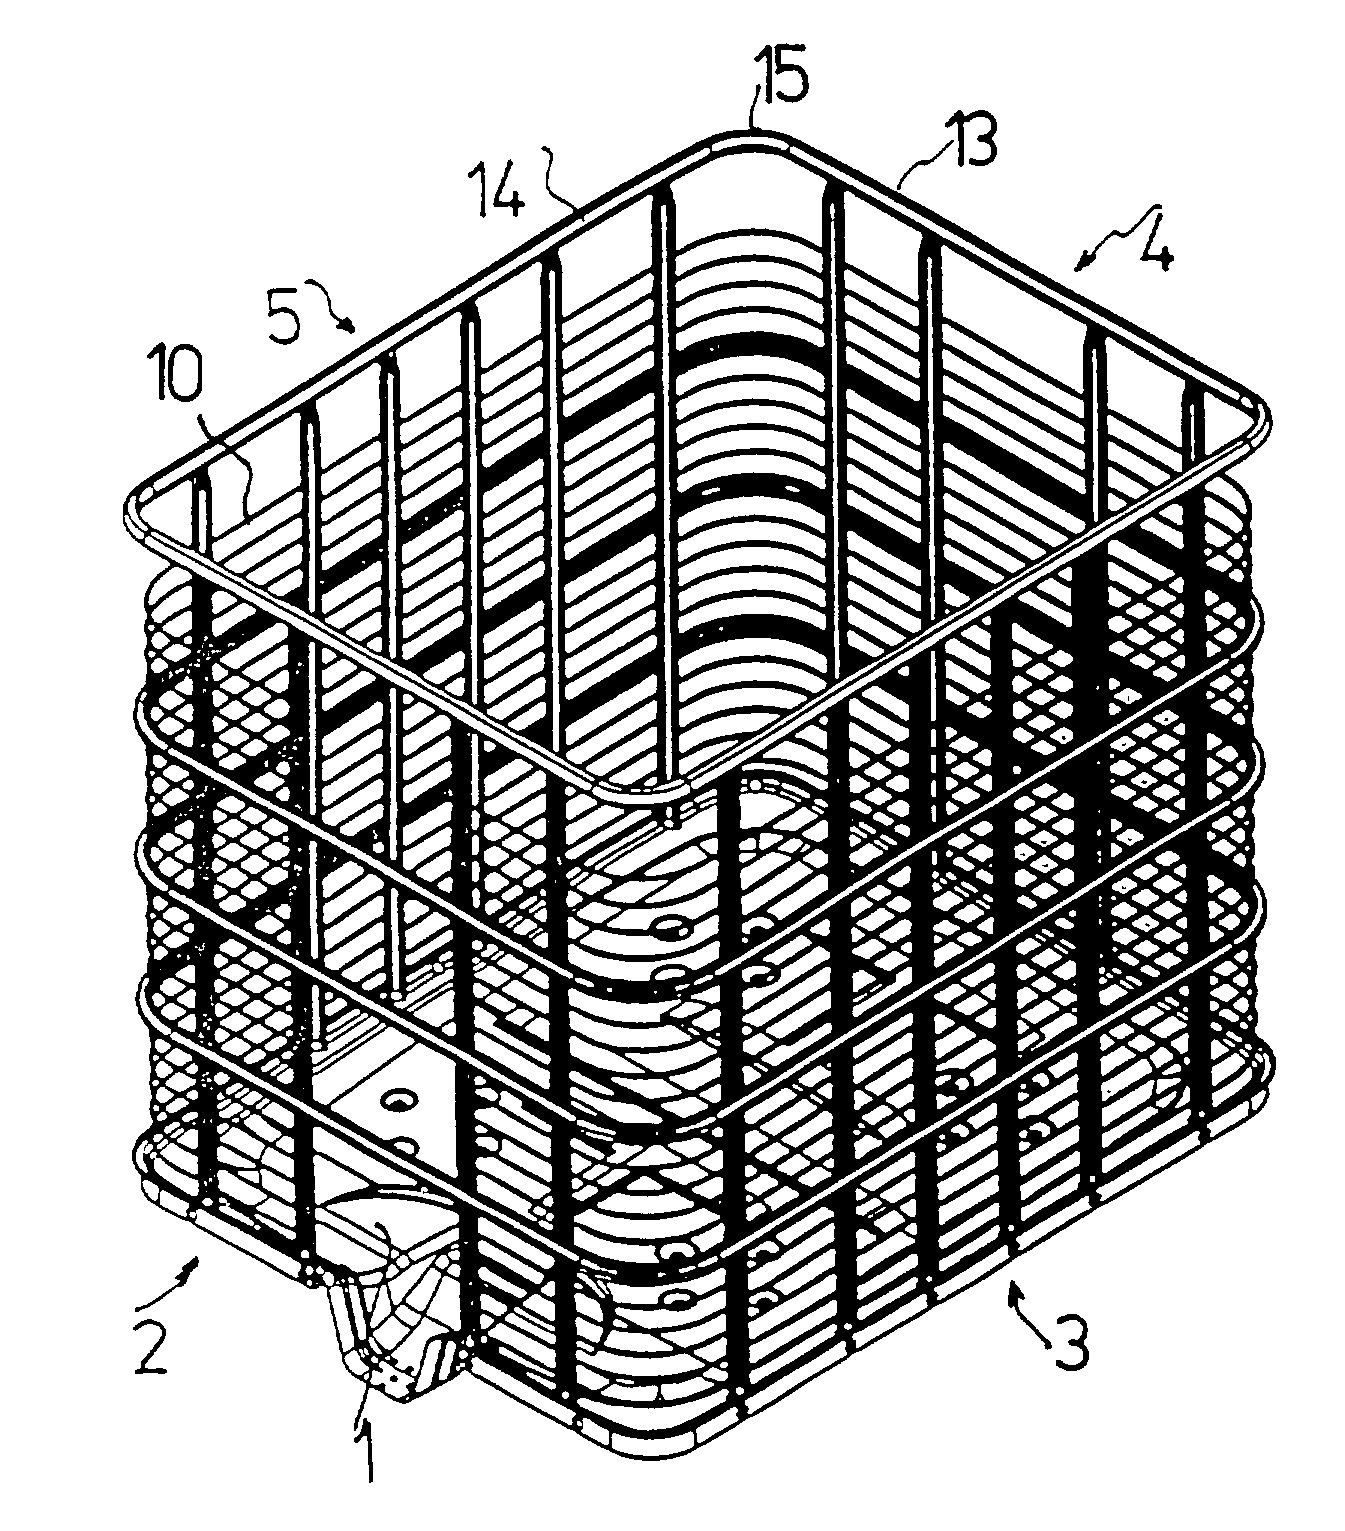 Grid casing for a container